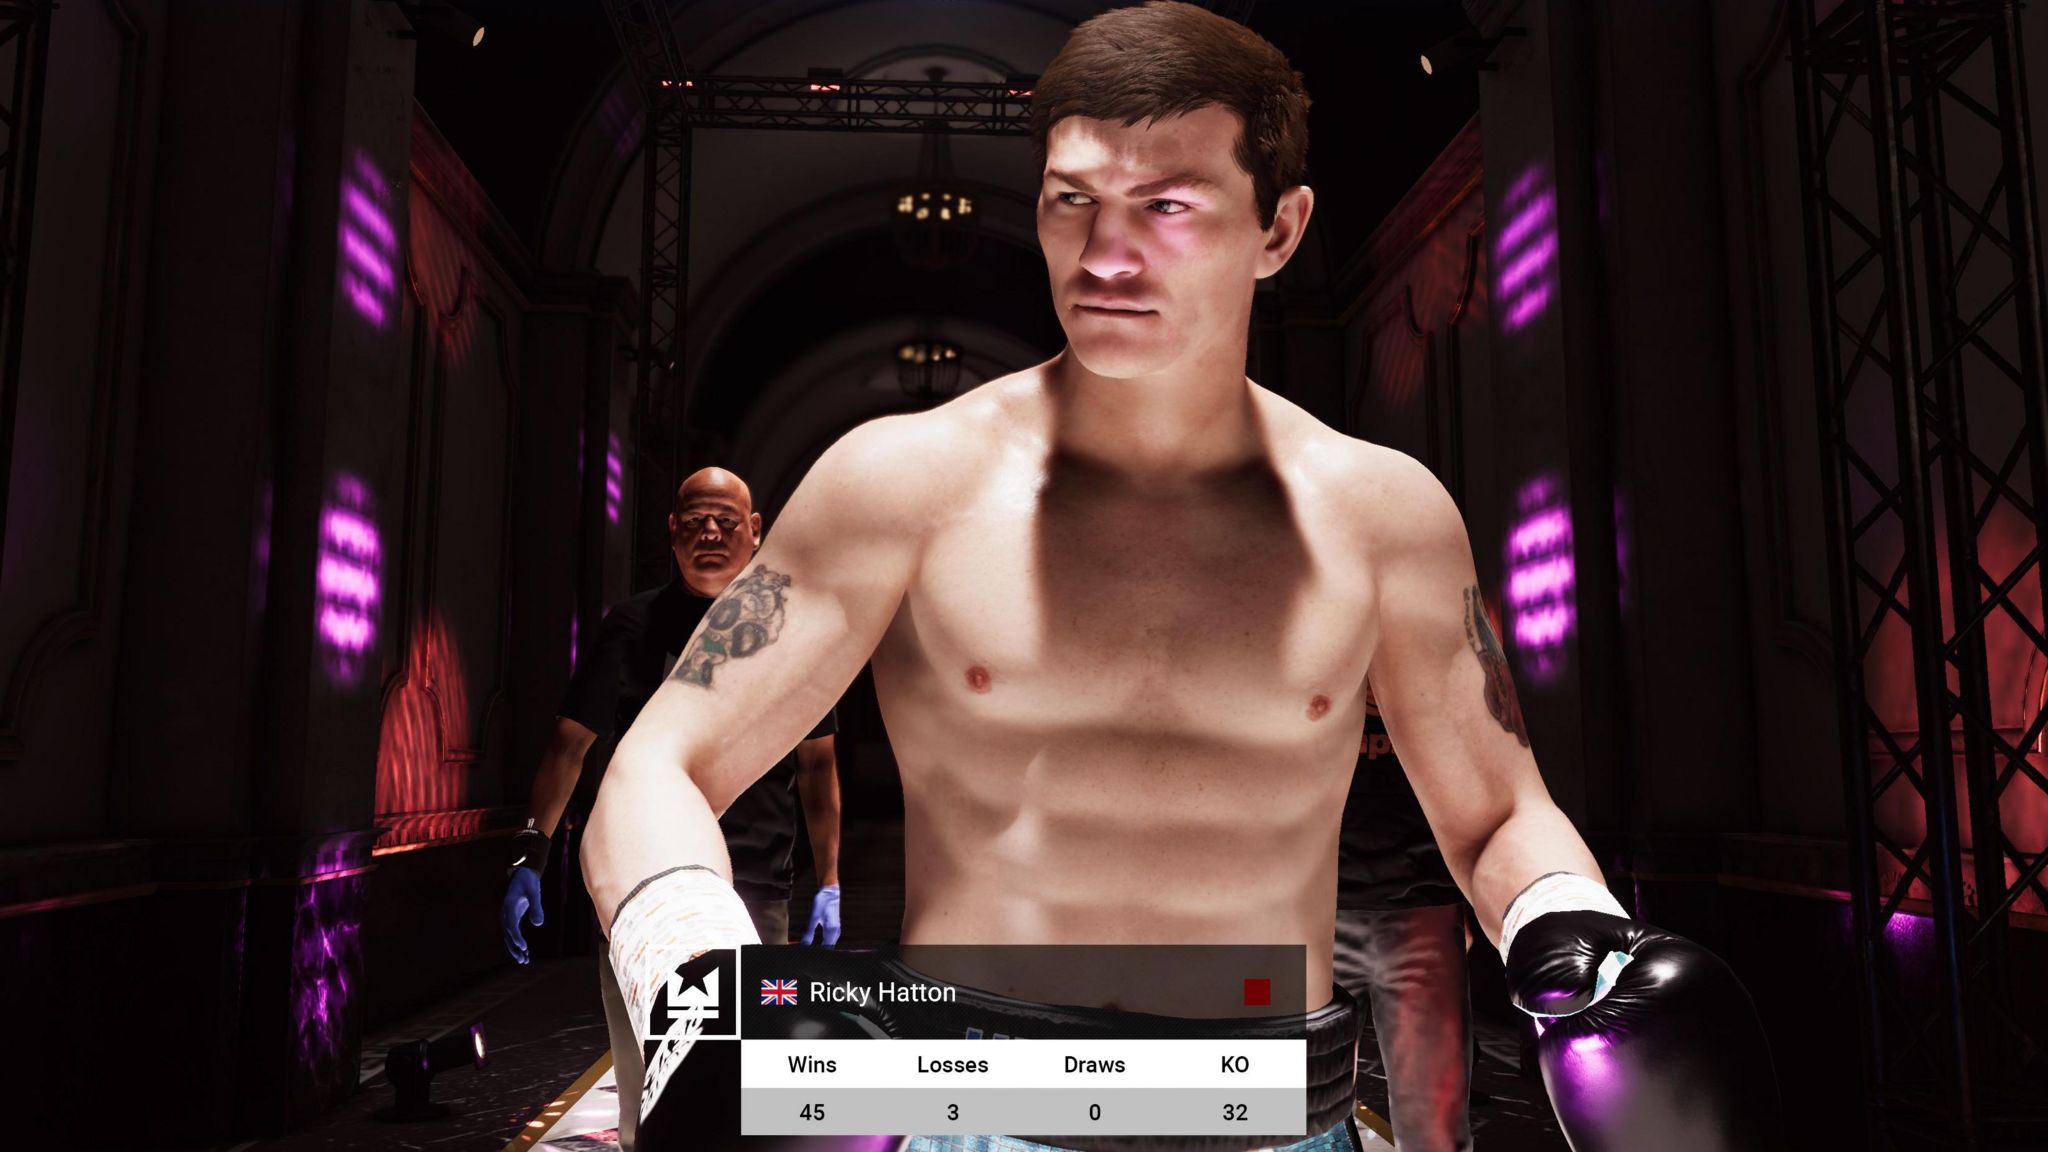 A computer-generated image of a boxer walking into a boxing ring. He's bathed in stage lighting and has a stern look on his face.